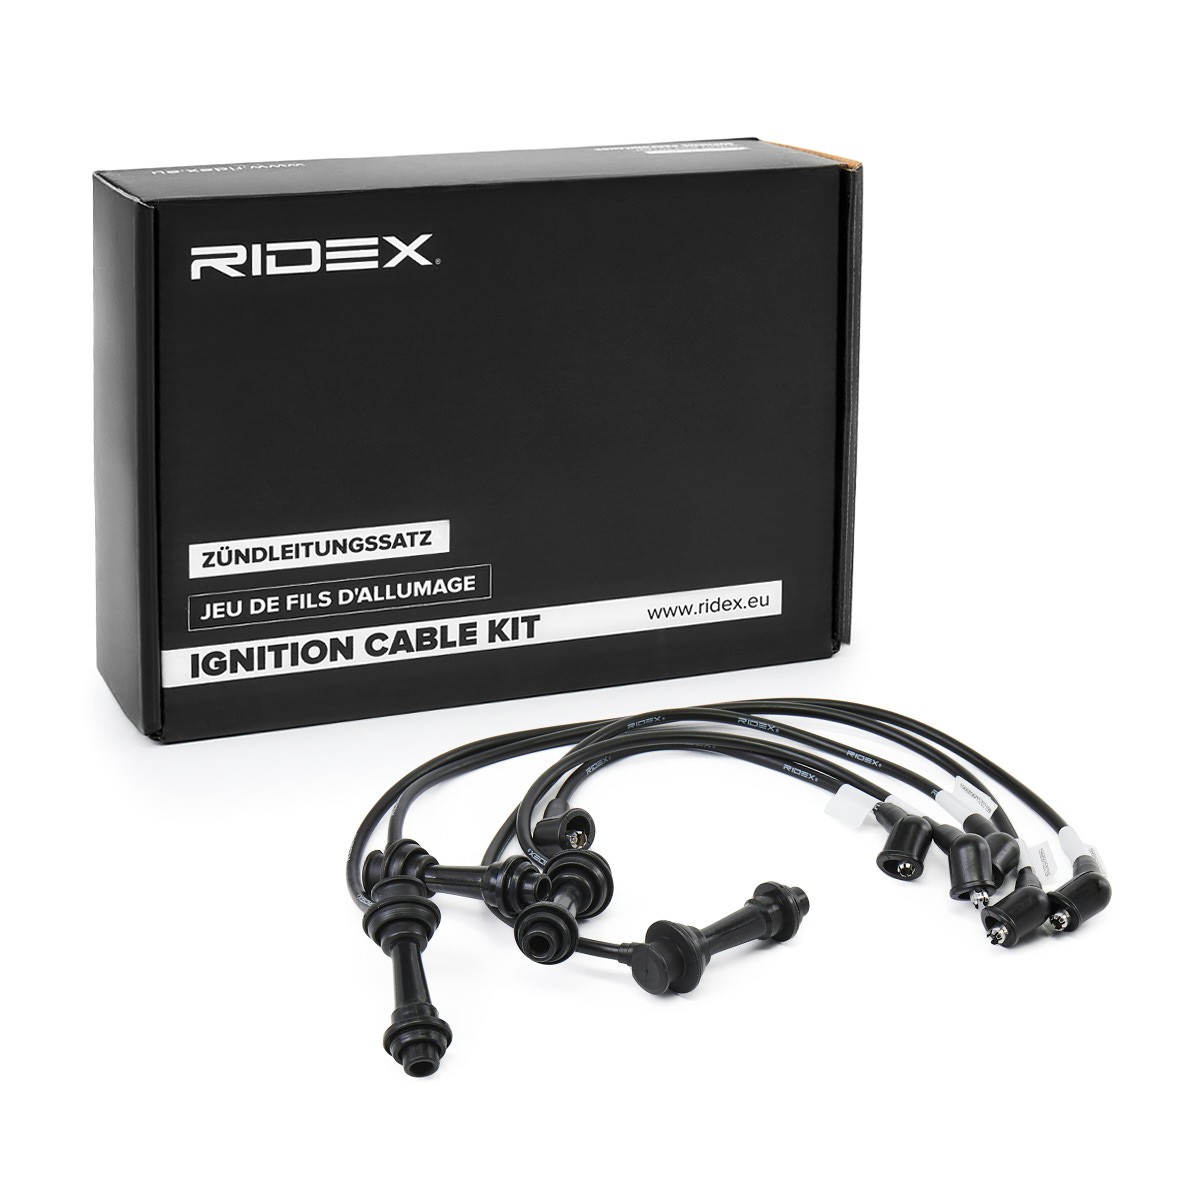 Great value for money - RIDEX Ignition Cable Kit 685I0228